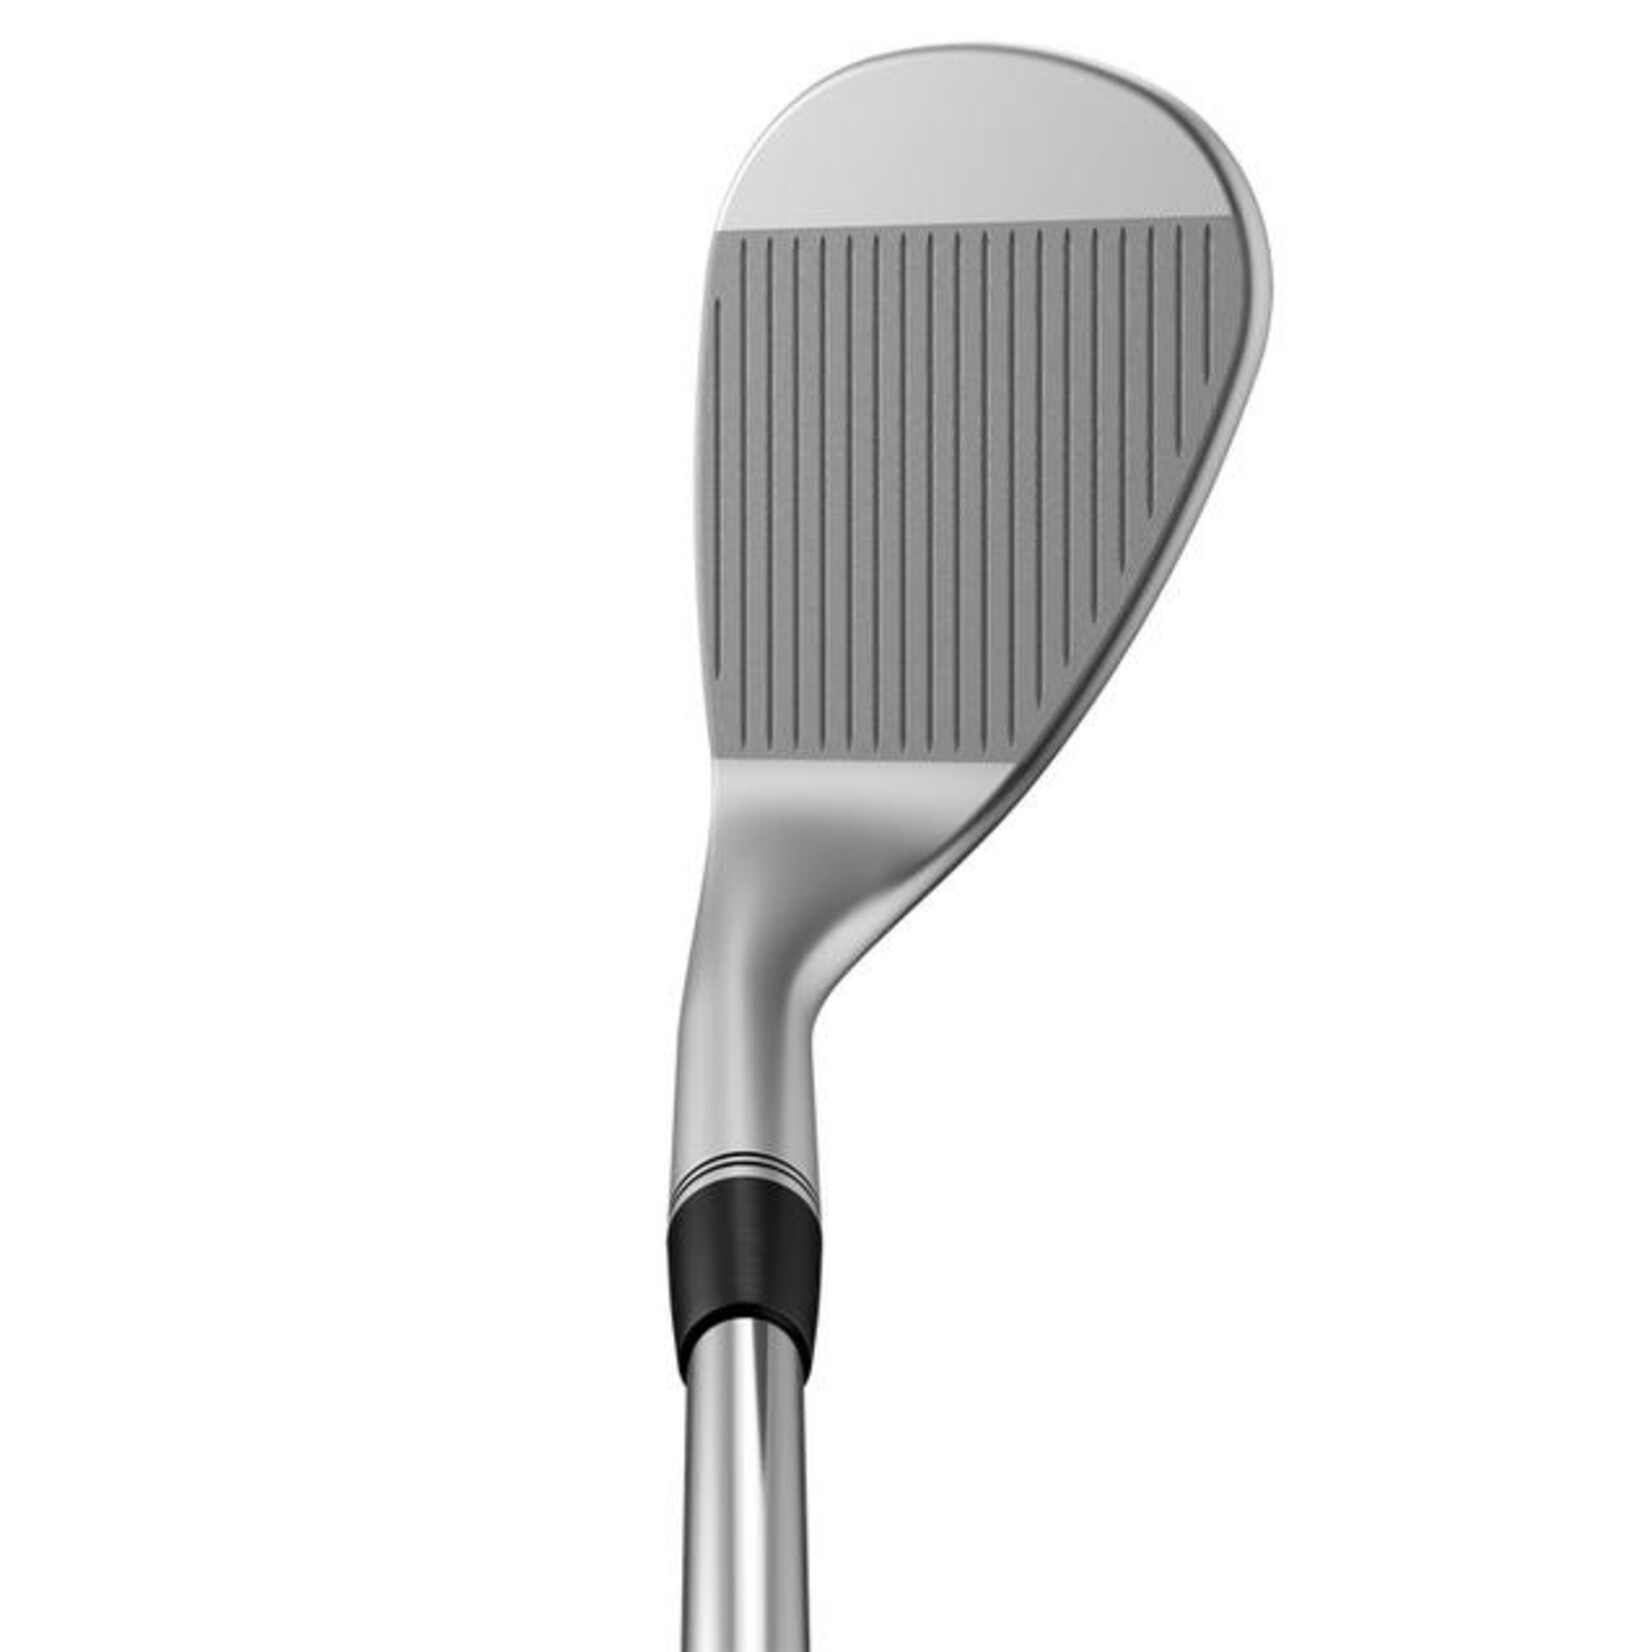 Ping Ping Glide Forged Pro Wedge